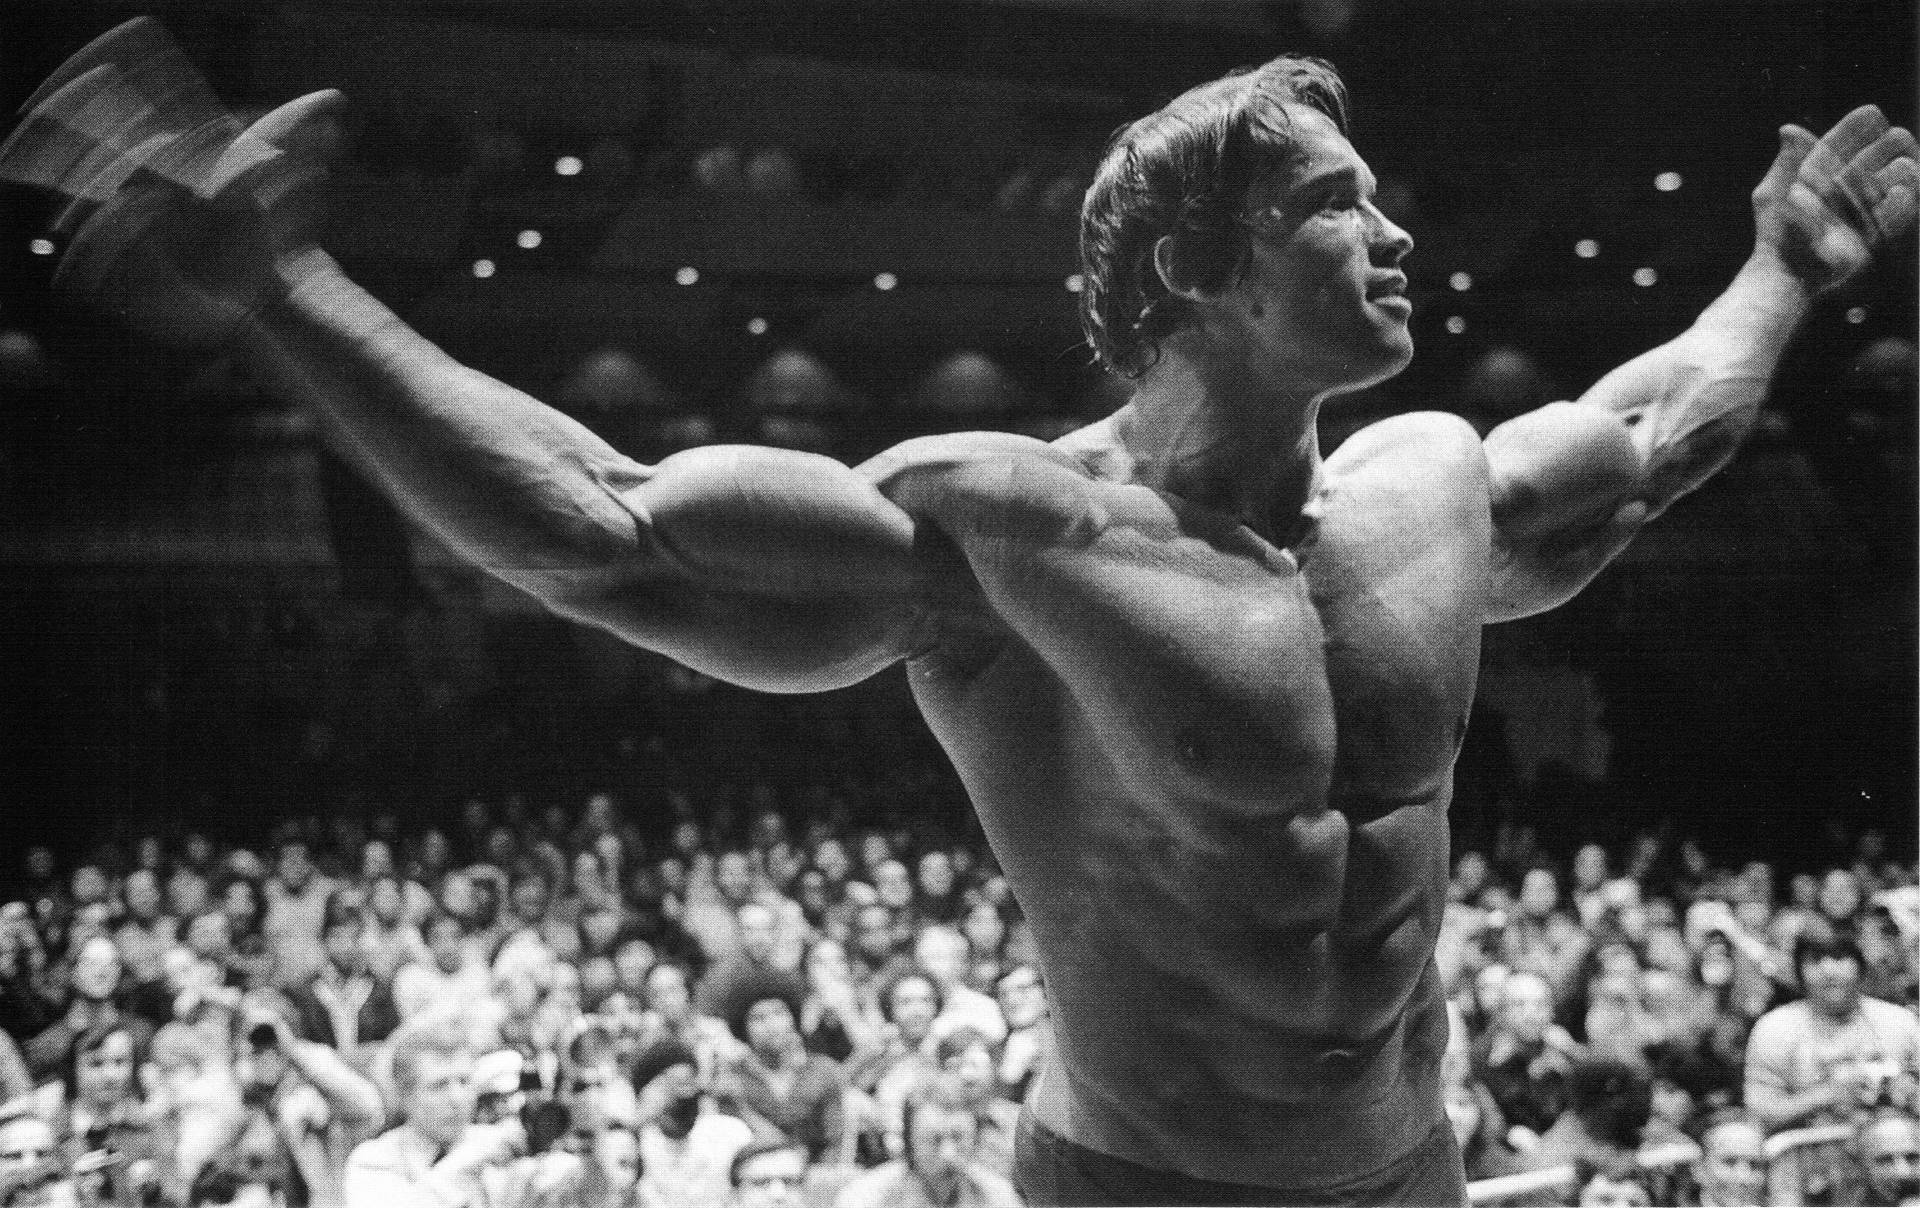 How to Master the Art of “Old School” Muscle Building